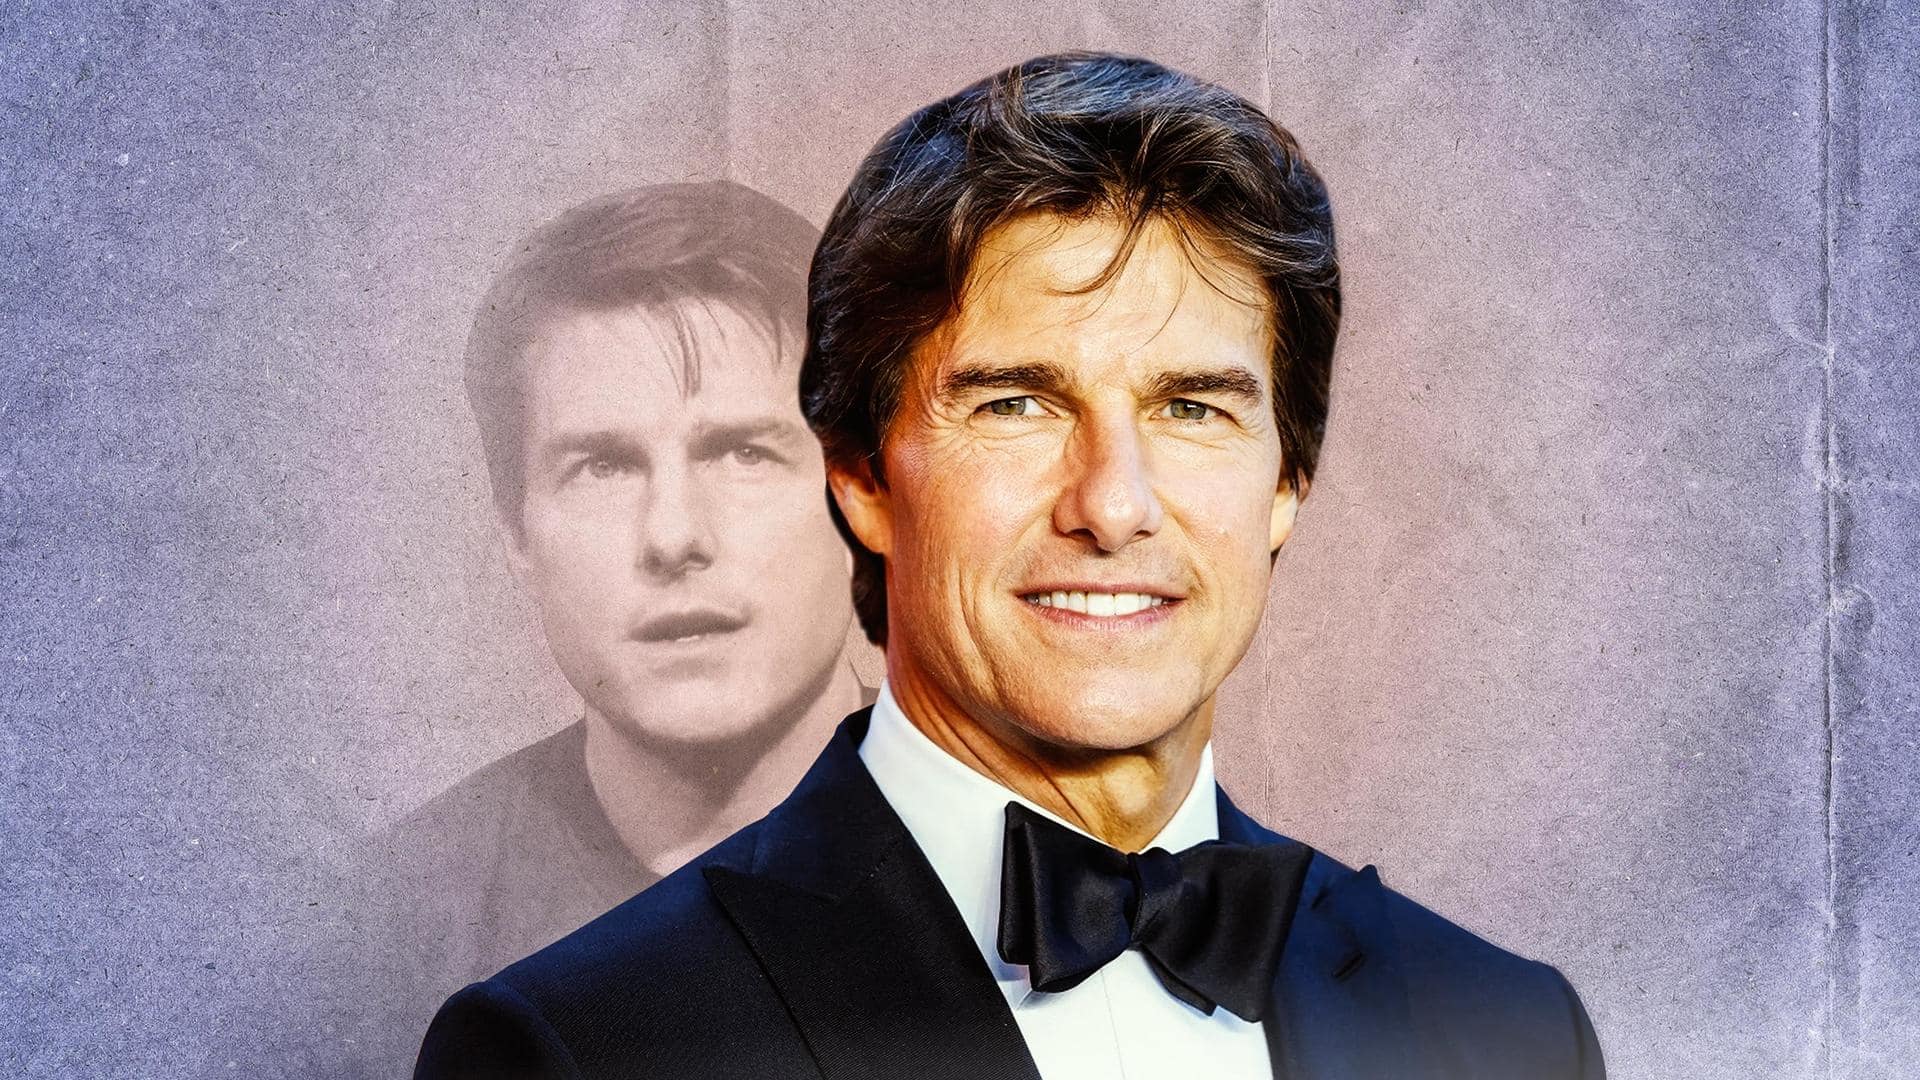 Happy birthday, Tom Cruise: Actor's must-see performances beyond action blockbusters